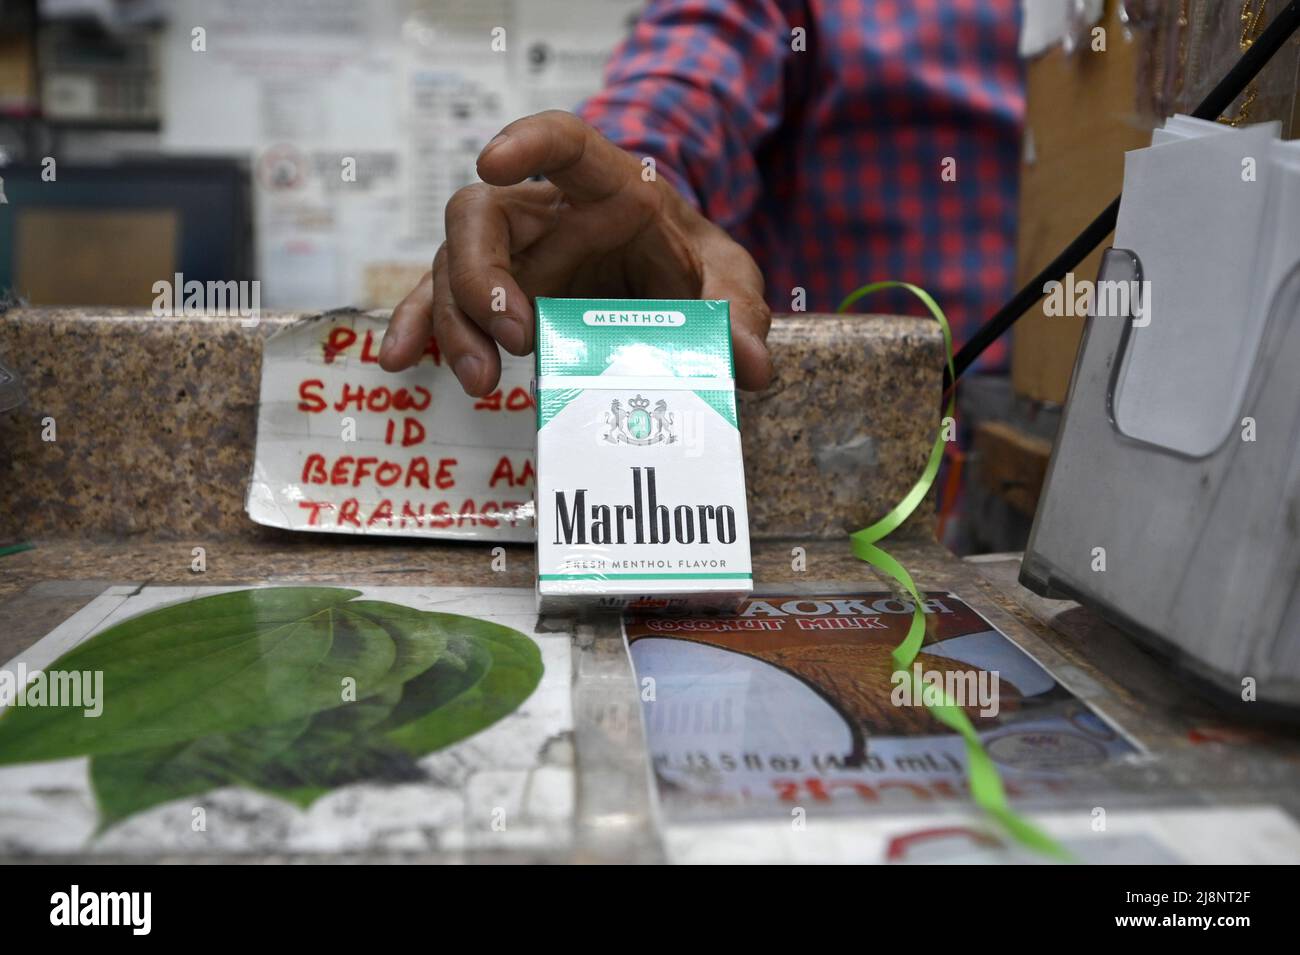 New York, USA. 17th May, 2022. A shopkeeper holds a pack of Menthol Marlboro cigarettes in the Queens borough of New York City, NY, May 17, 2022. The FDA announced it intends to ban menthol cigarettes due to higher rates of smoking-related illness and death in African-Americans communities where they are heavily advertised, as well as flavored cigars popular with younger smokers; the menthol chemical added to cigarettes reduces throat irritation associated with smoking. (Photo by Anthony Behar/Sipa USA) Credit: Sipa USA/Alamy Live News Stock Photo